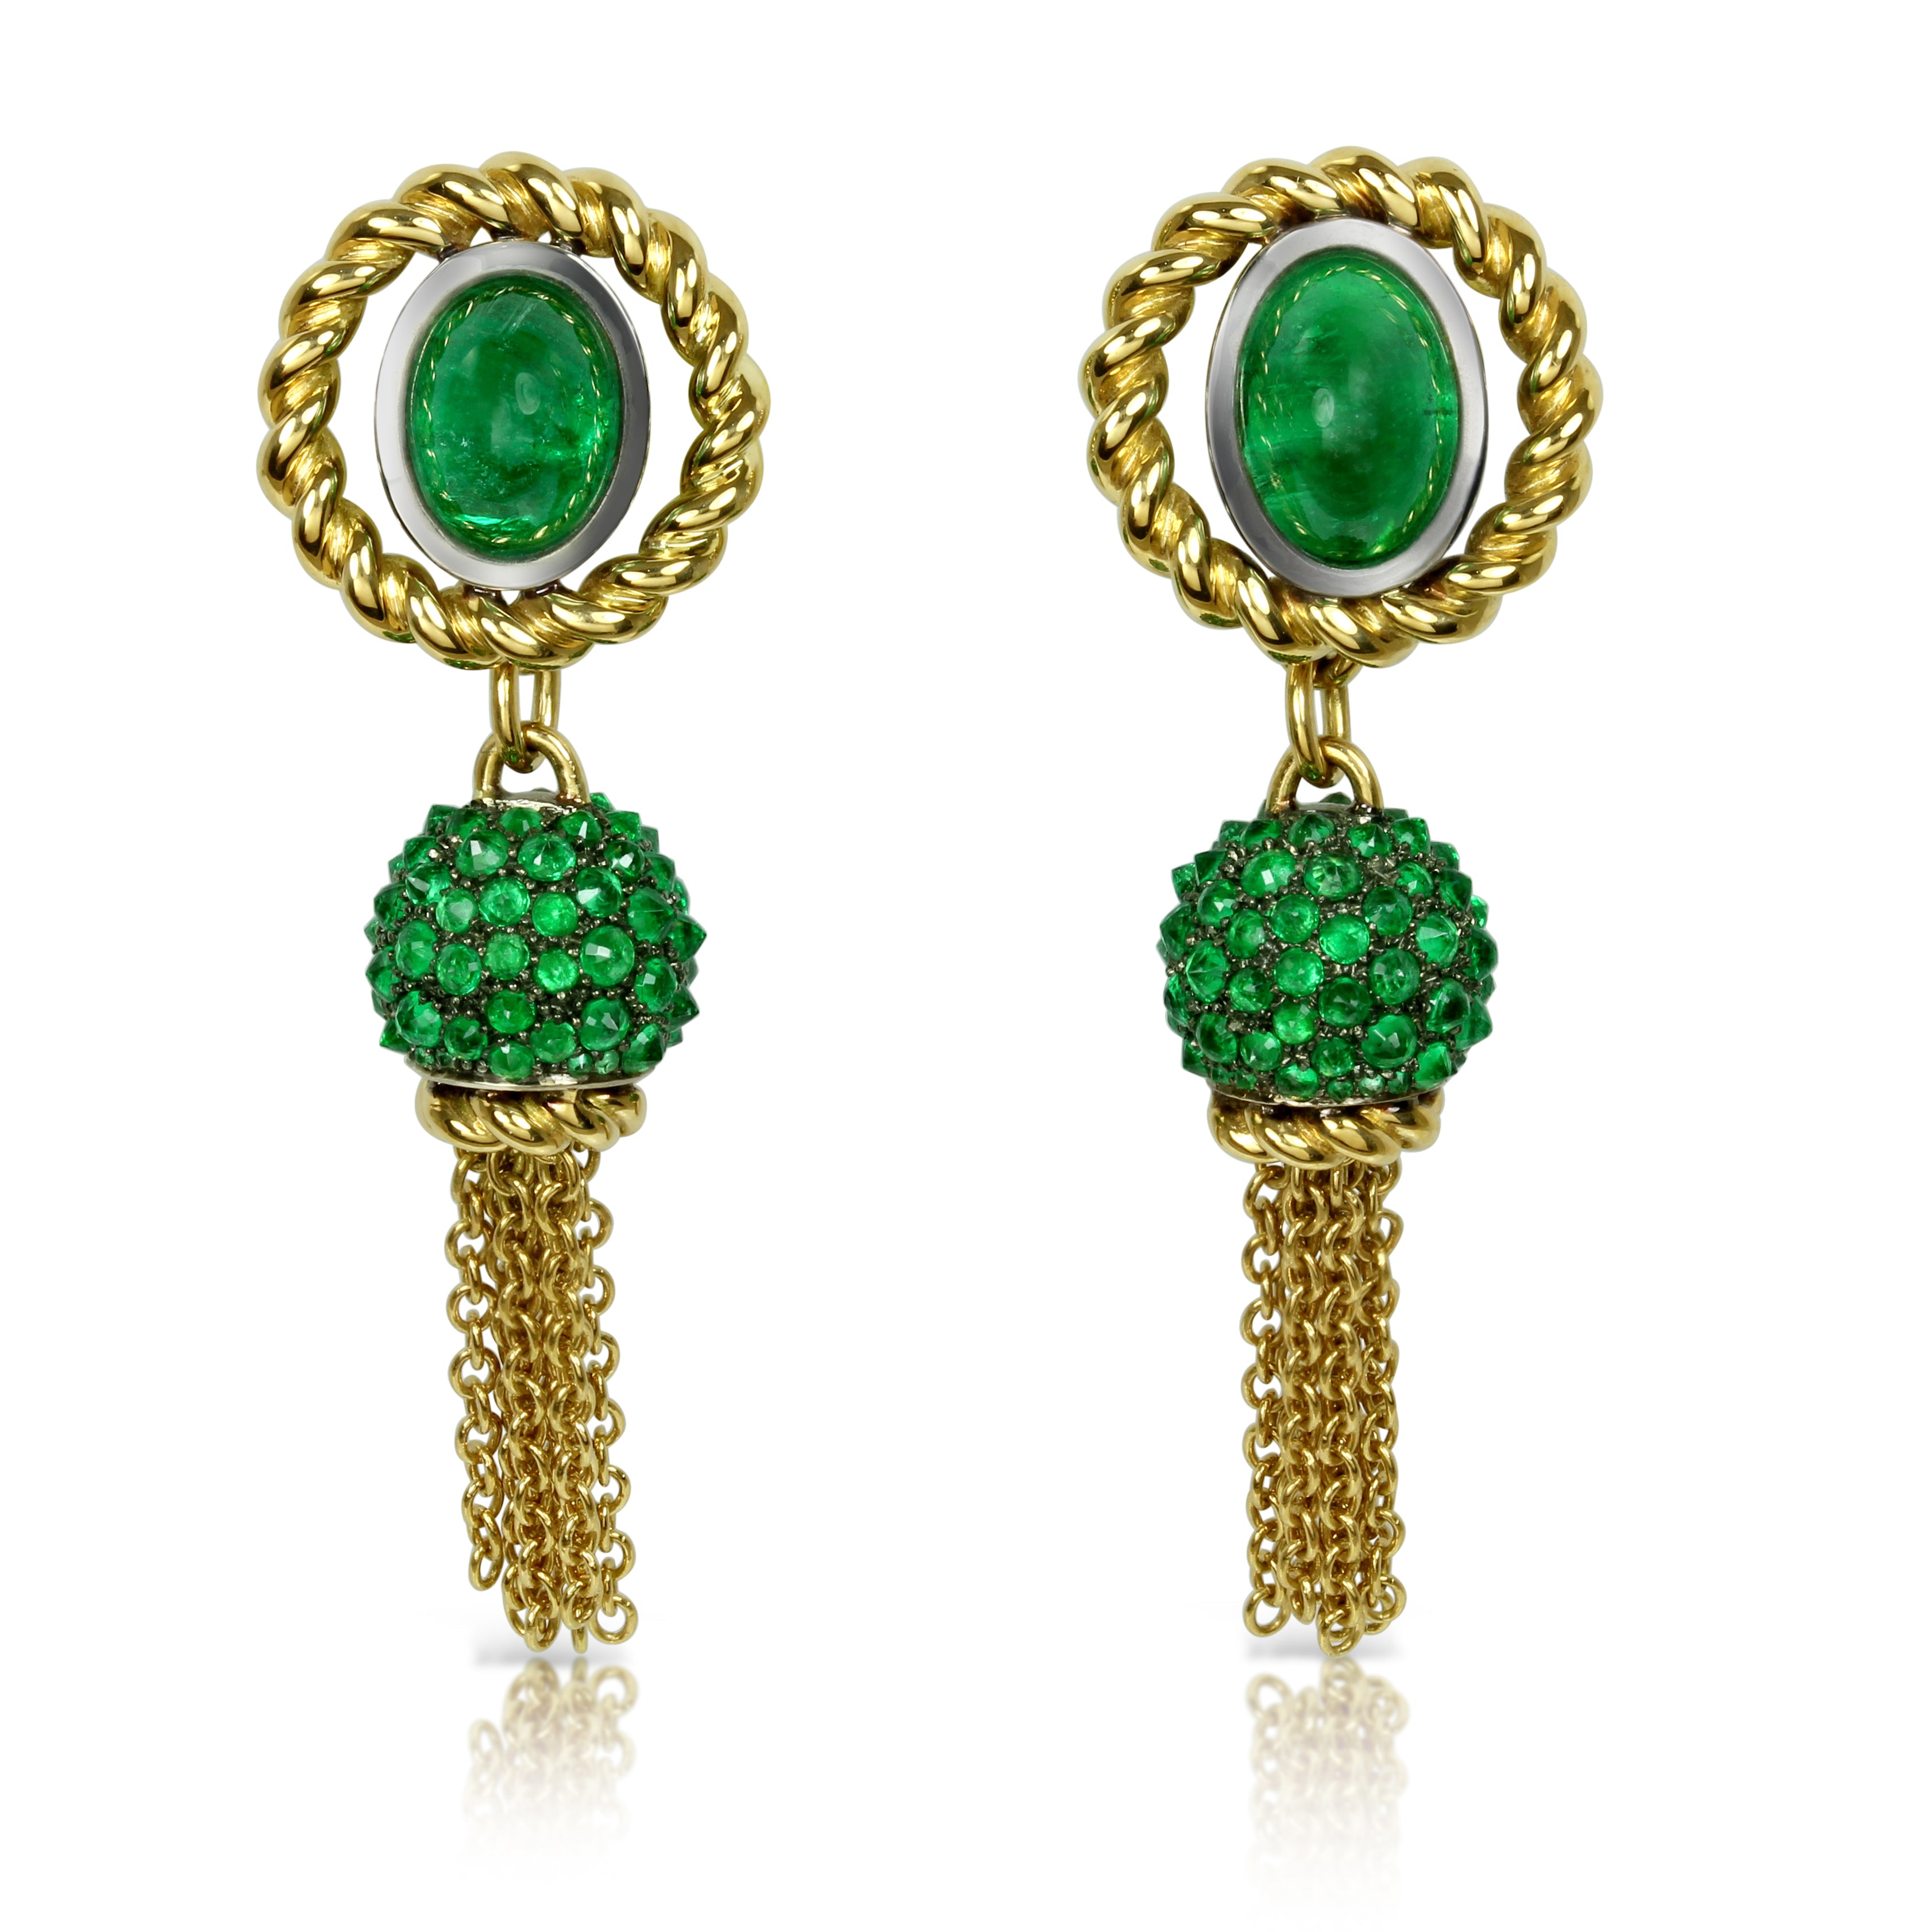 Earrings "Double Helix" Yellow Gold and Rhodium-plated Sterling Silver with Emeralds